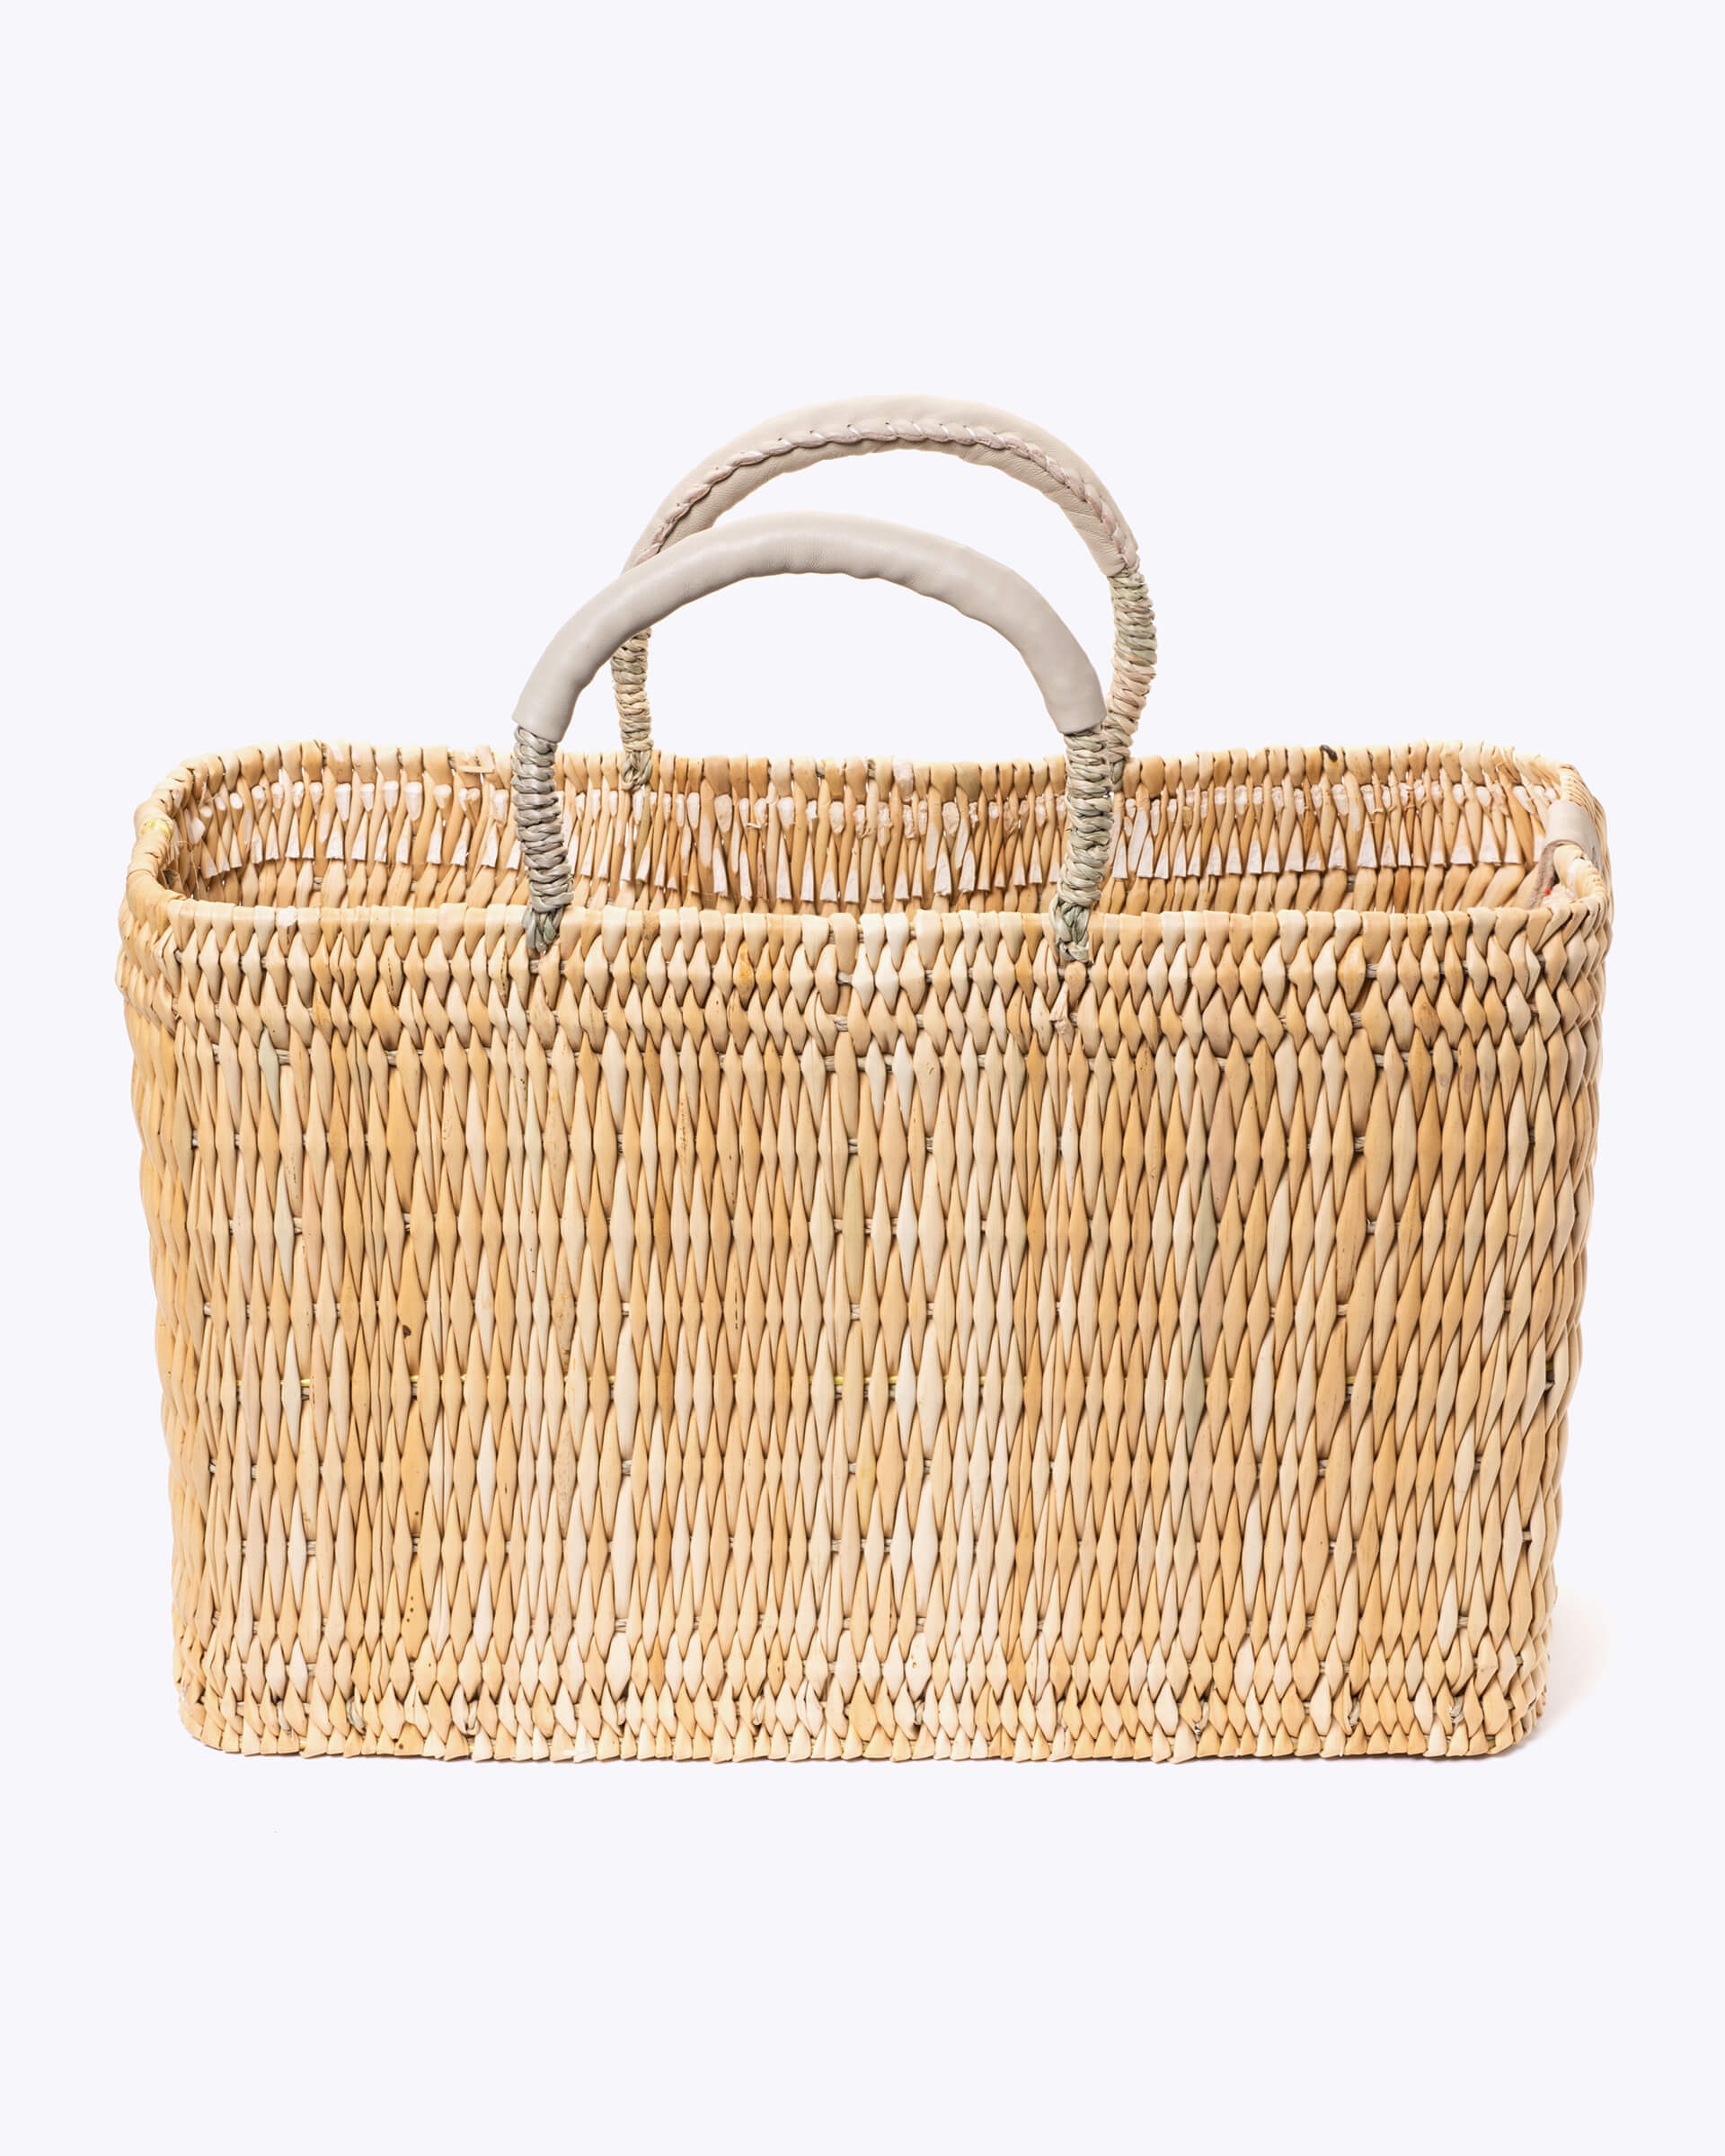 medium straw basket wrapped with neutral leather handle on a white background 